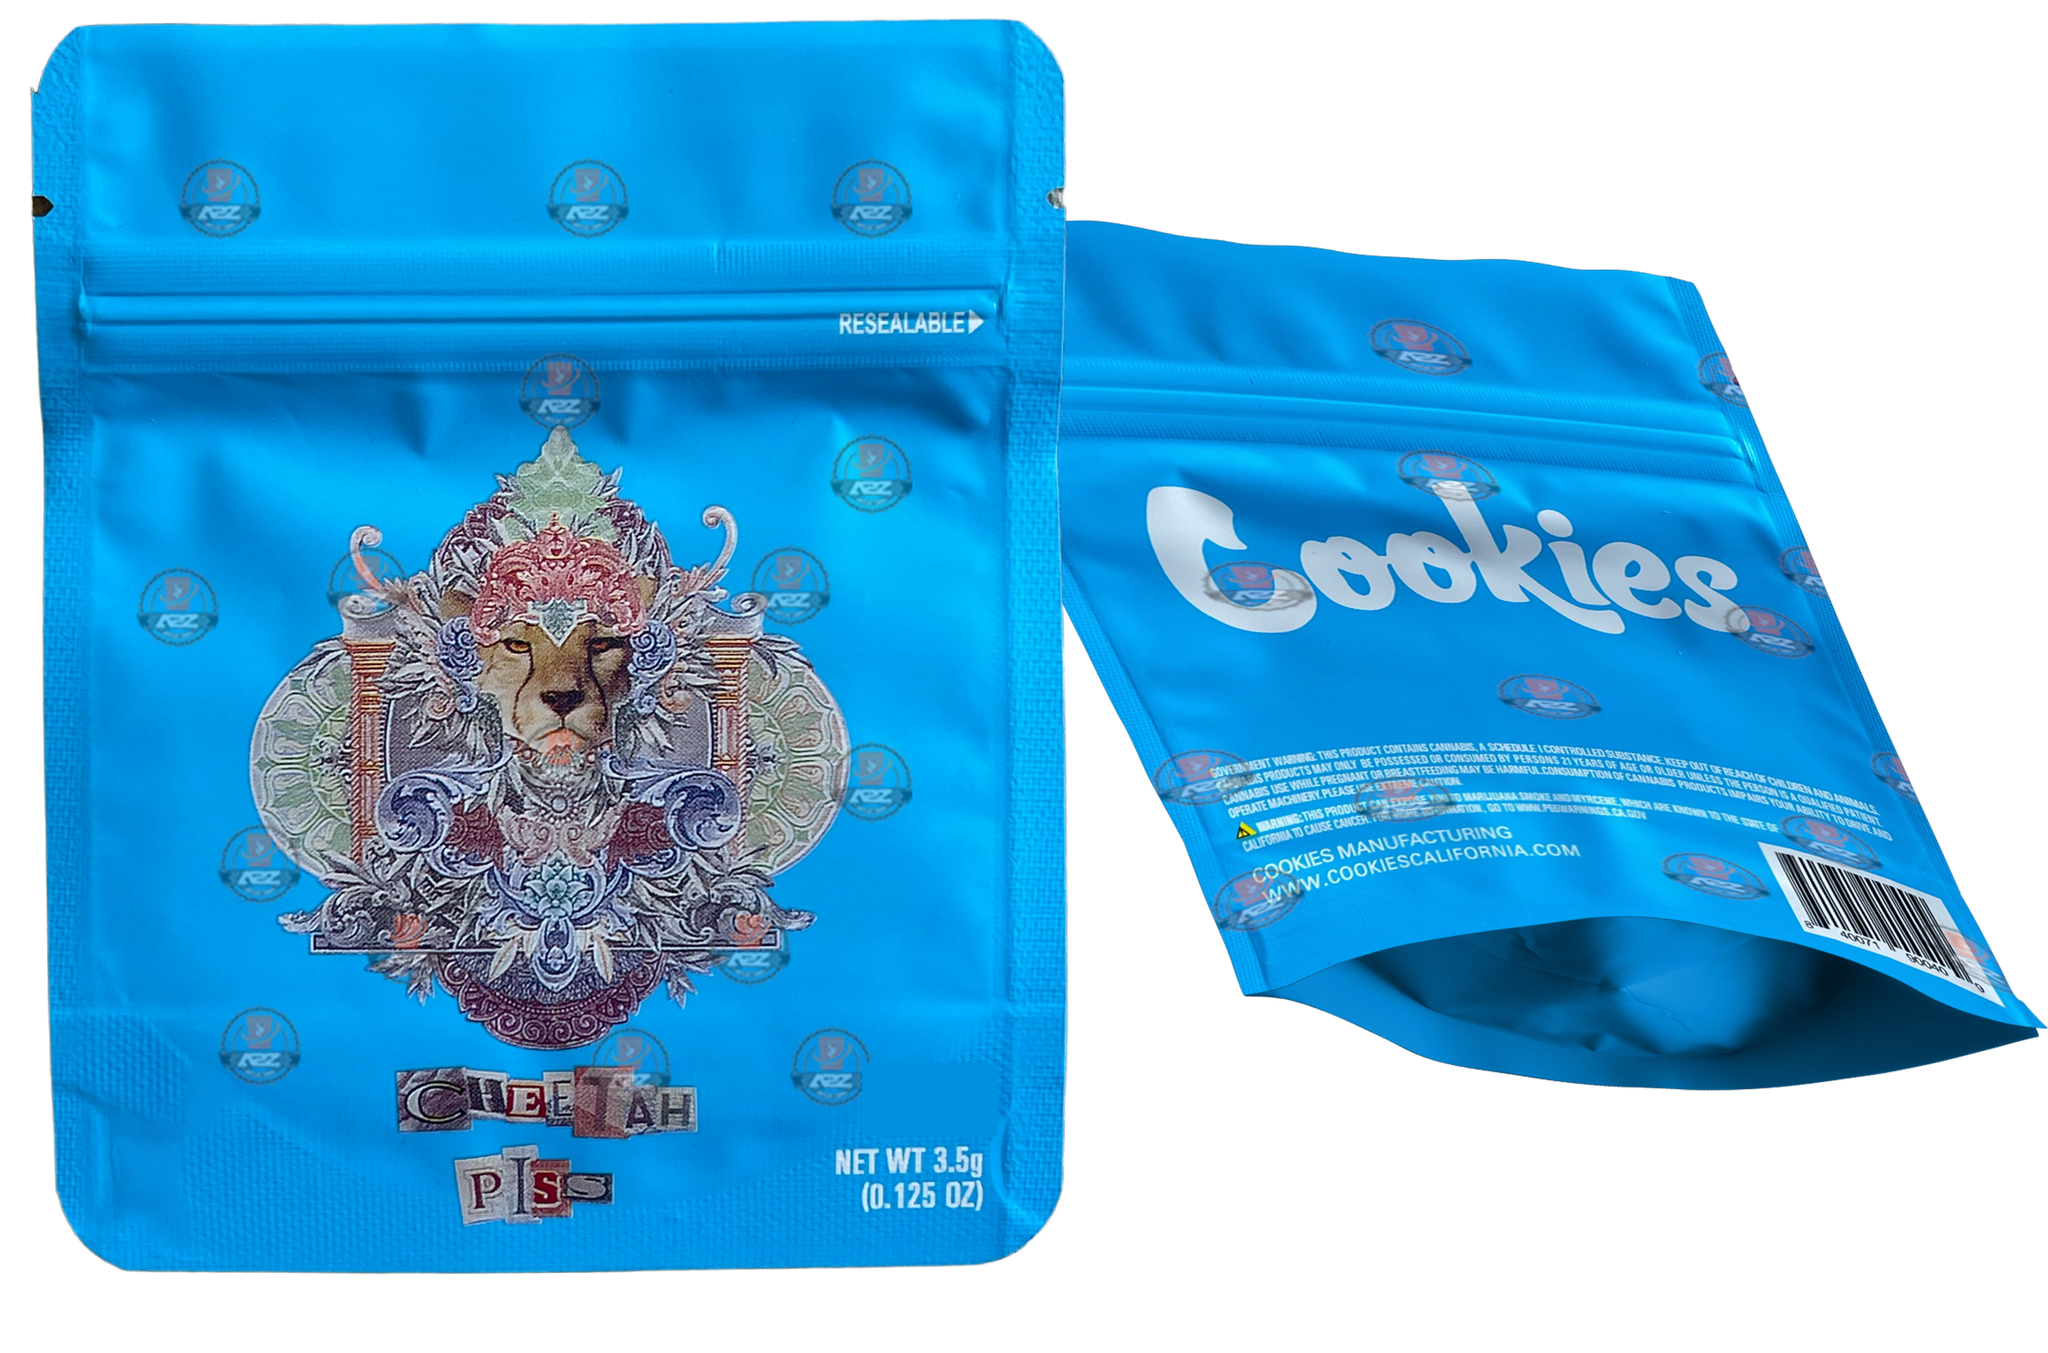 Cookies Cheetah Piss Mylar Bags 3.5 Grams Smell Proof Resealable Bags w/ Holographic Authenticity Stickers